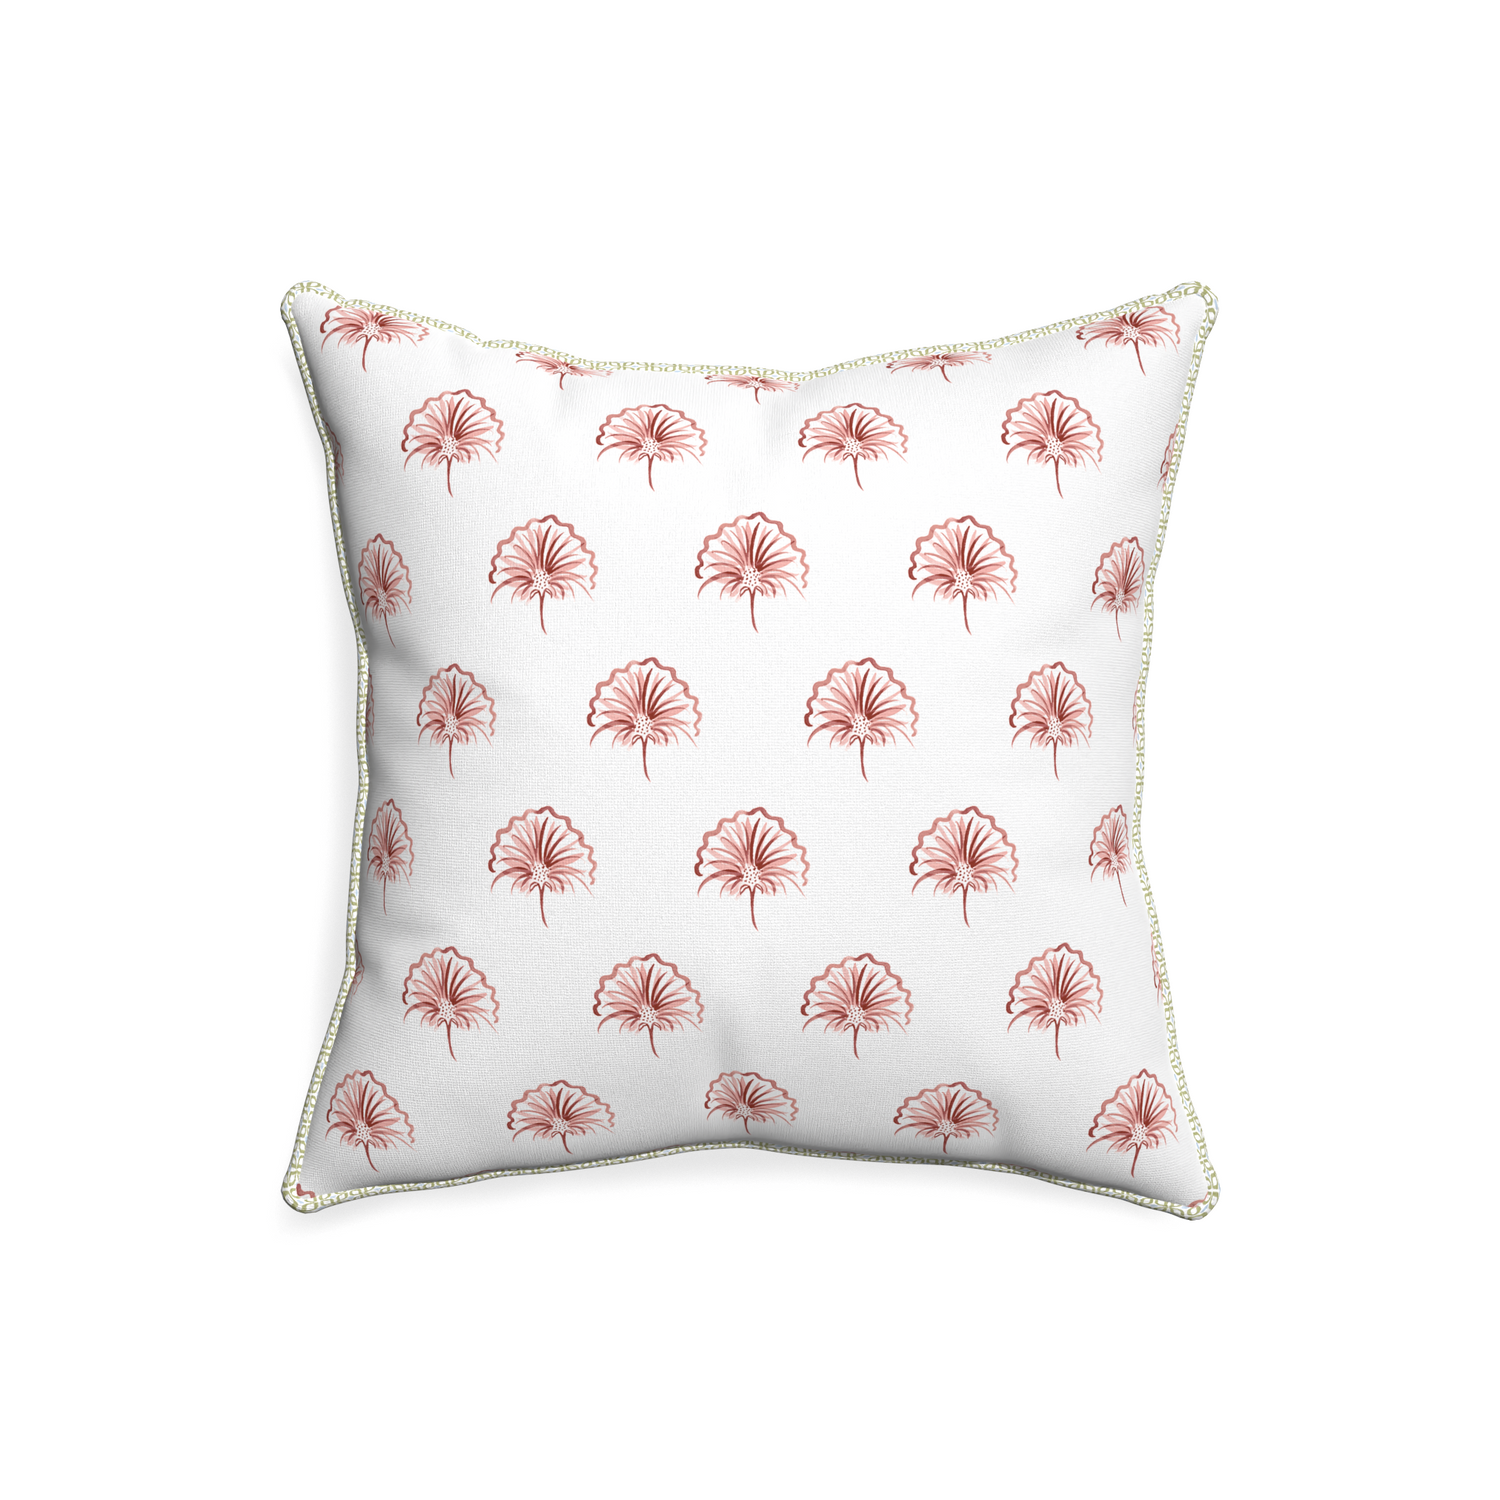 20-square penelope rose custom floral pinkpillow with l piping on white background